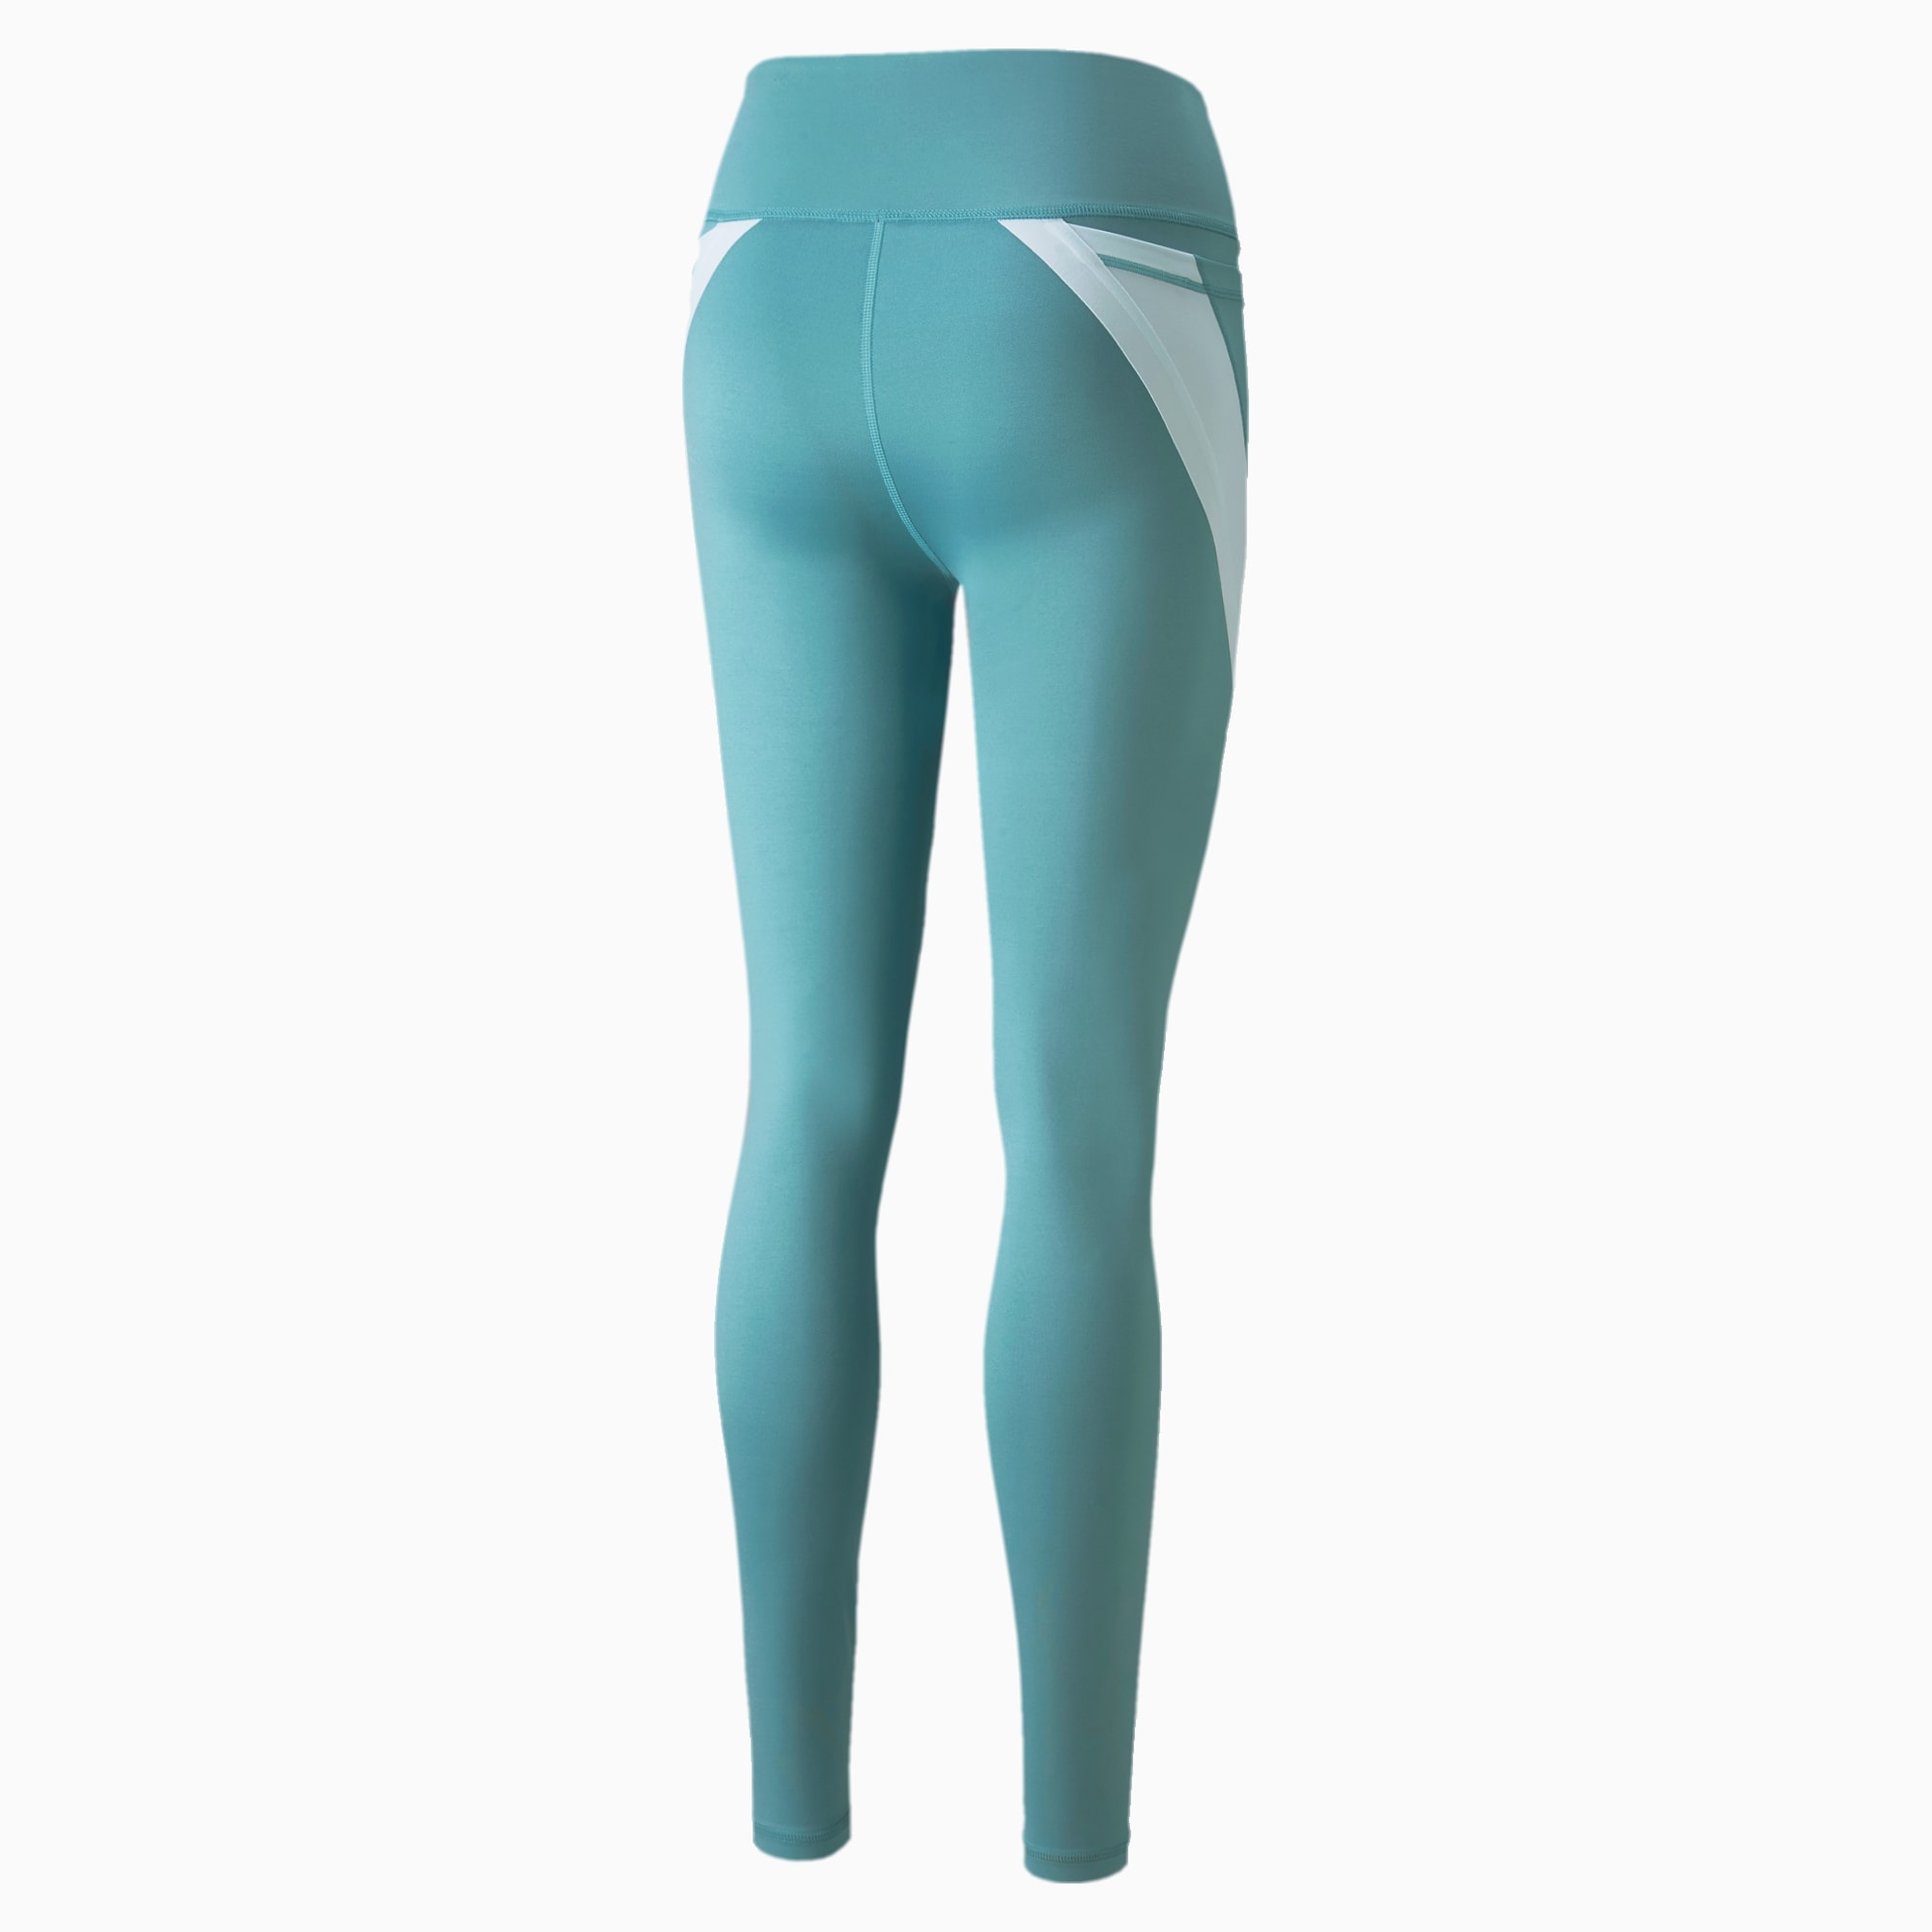 Puma Train Eversculpt high waist leggings in navy, new, never warn, with  tags